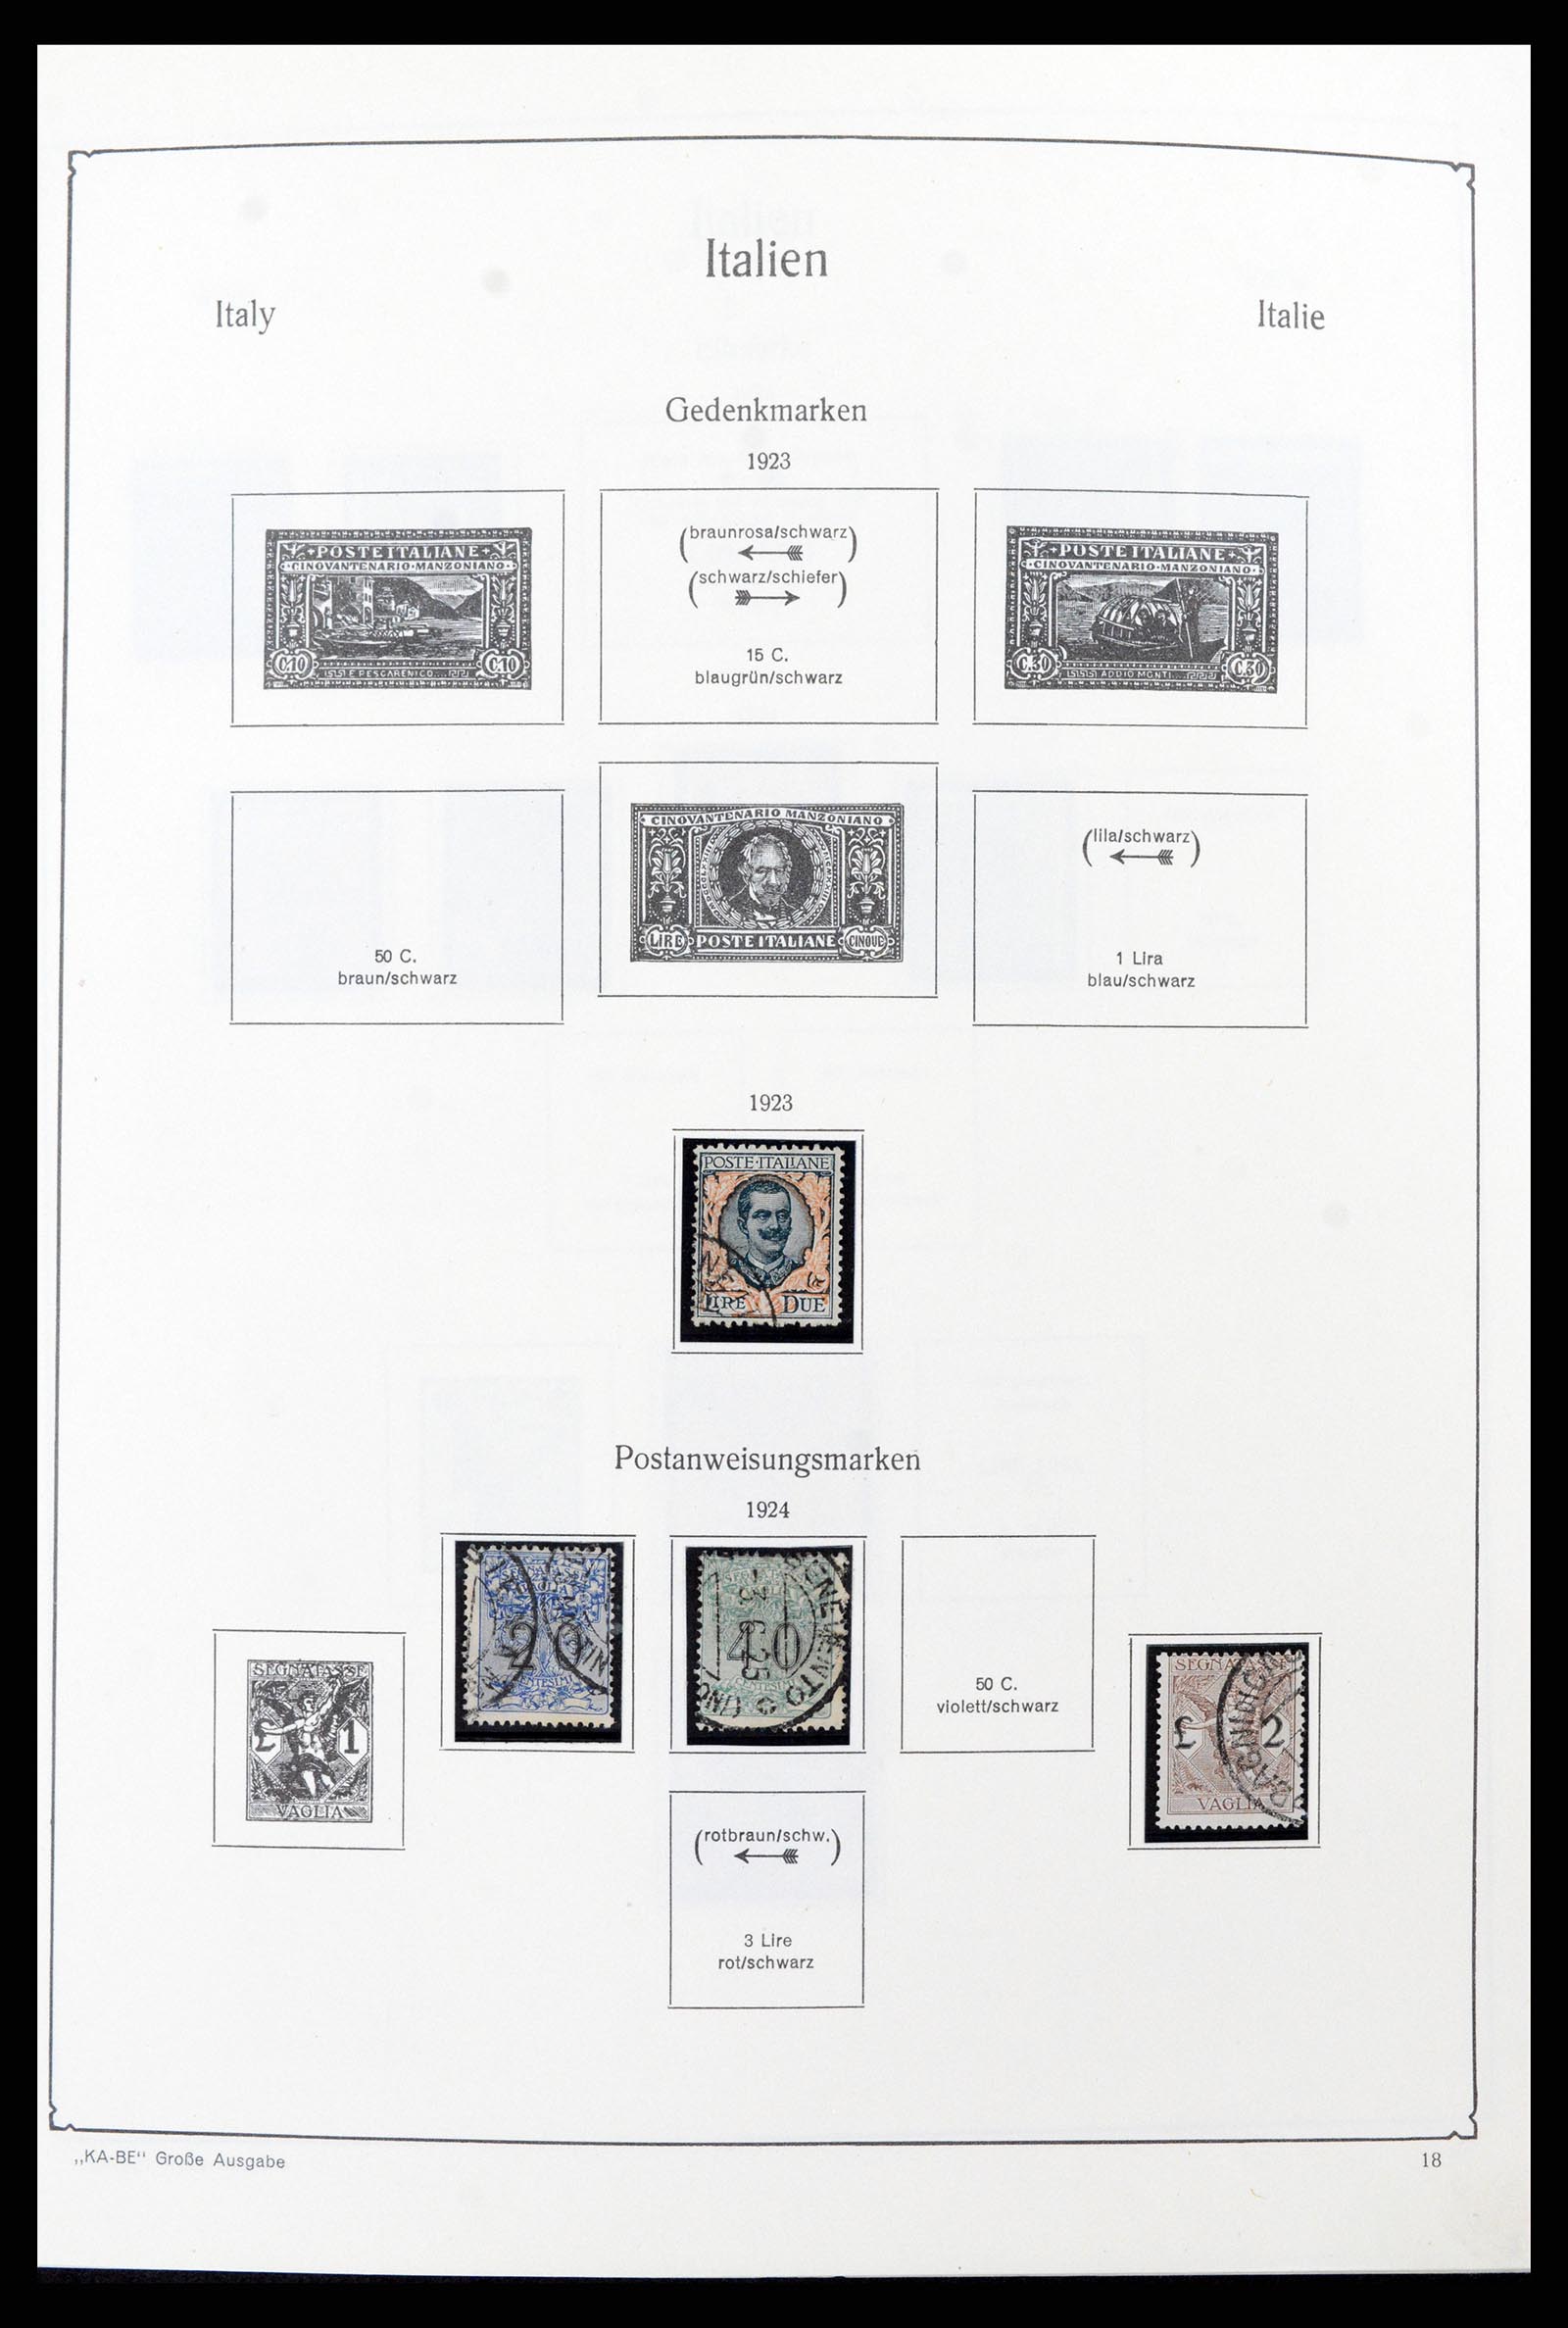 37605 033 - Stamp collection 37605 Italy and States 1855-1974.